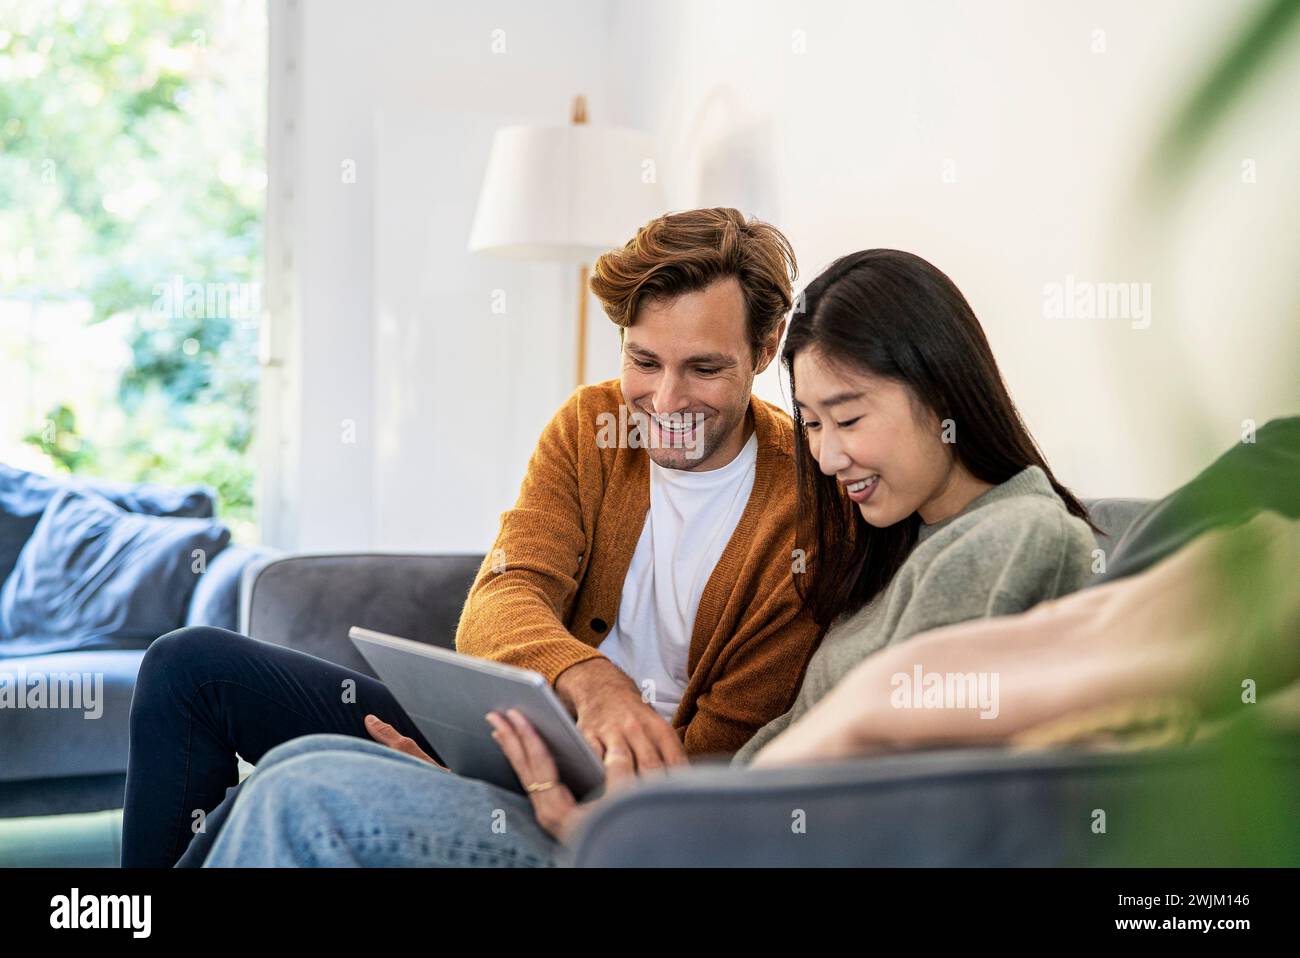 Adult couple using digital tablet while sitting on sofa Stock Photo